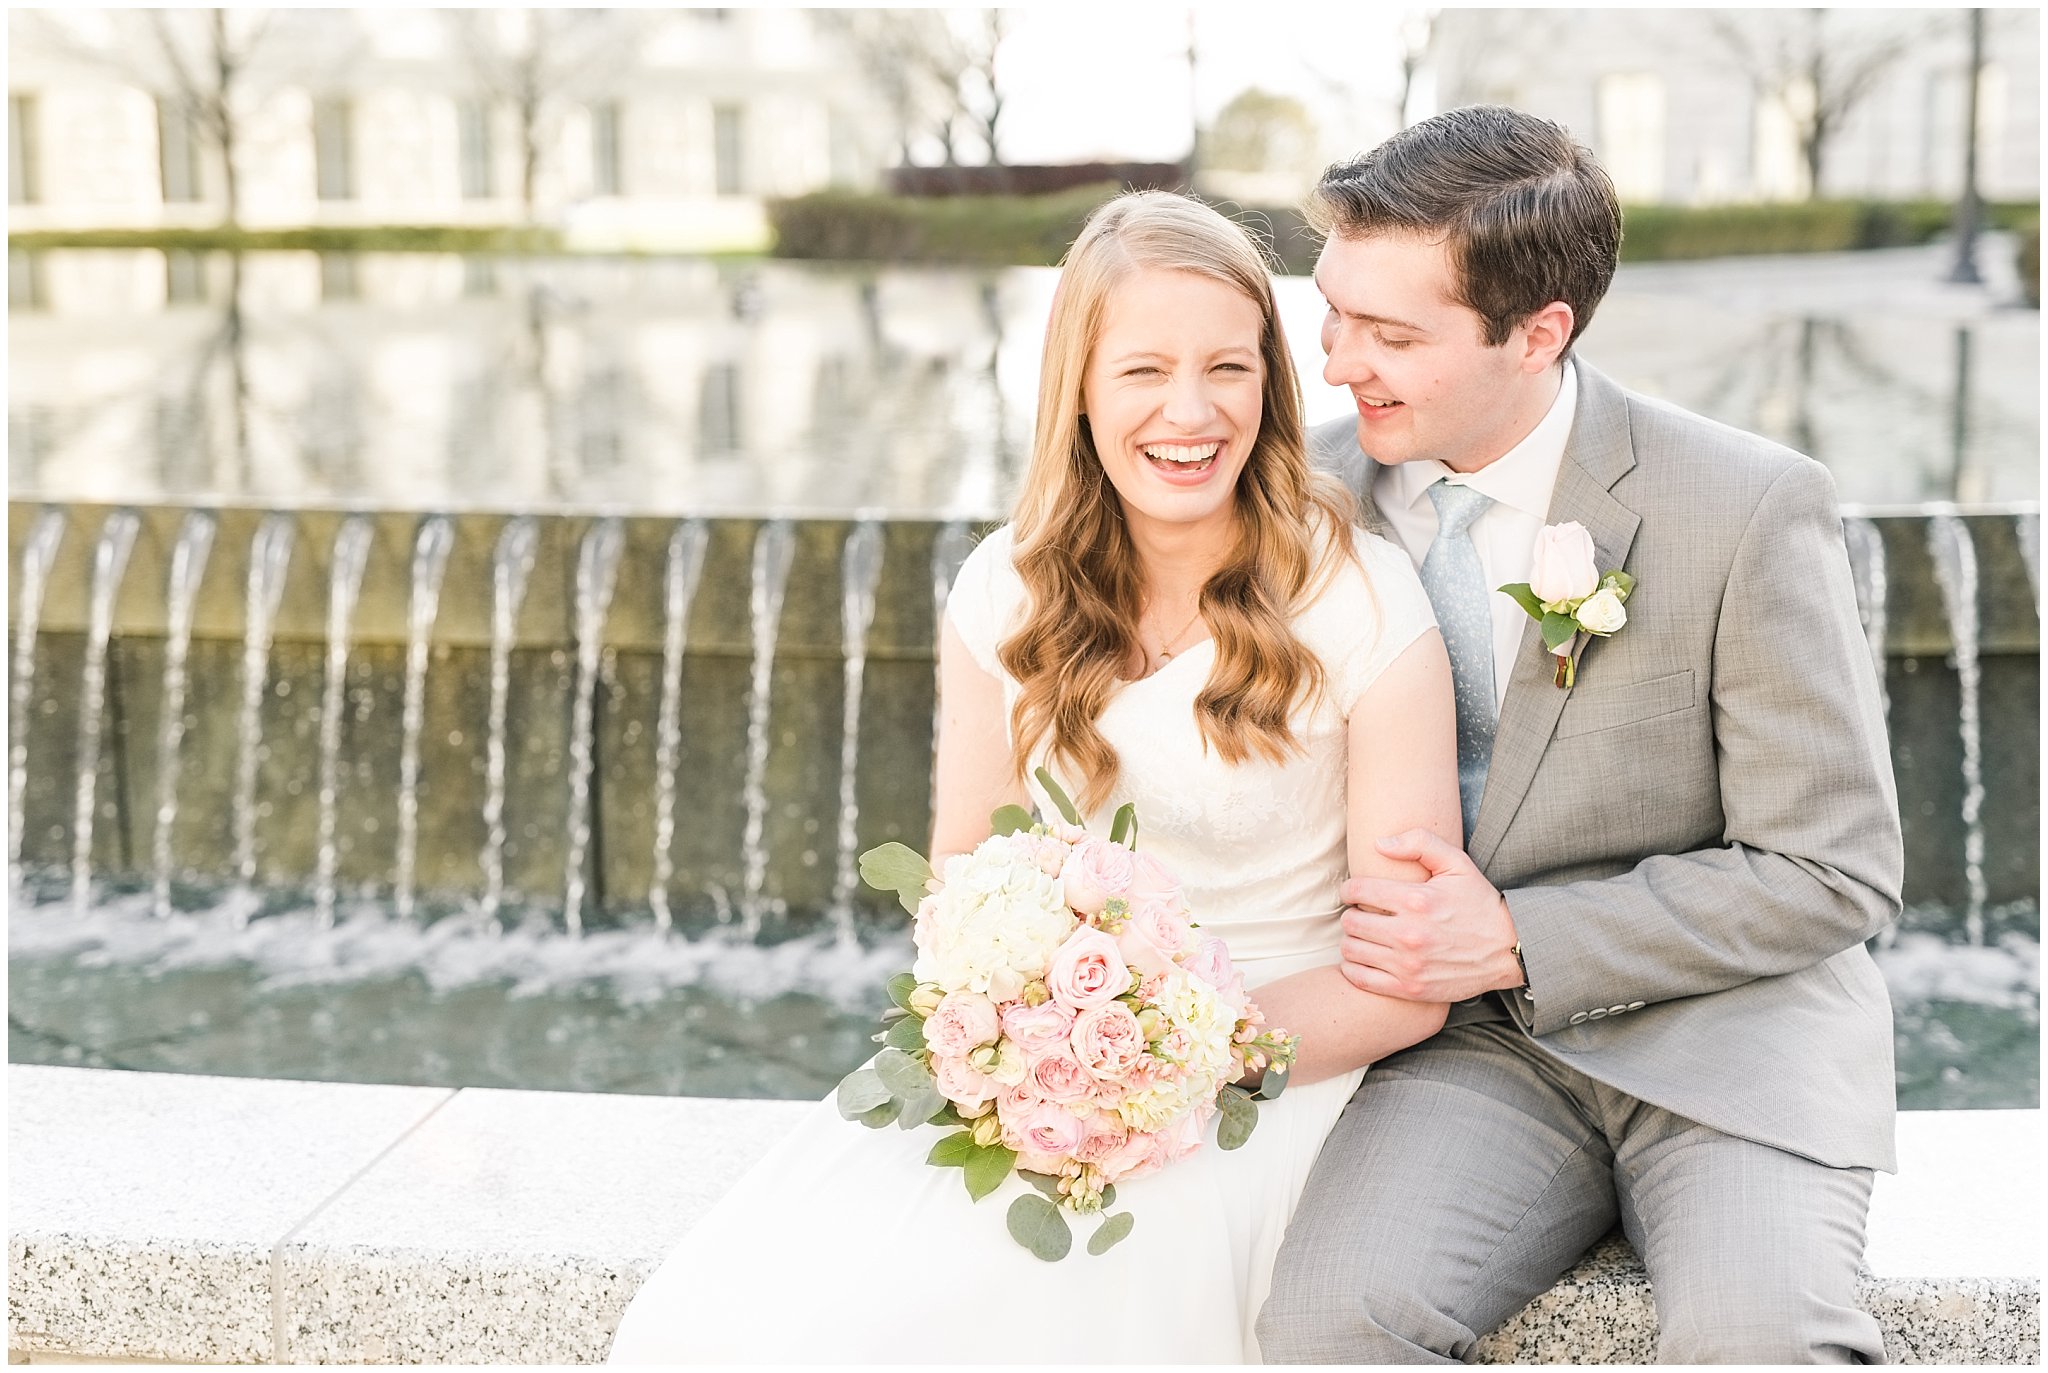 Bride with blush bouquet and groom with grey suit by capitol reflection pool | Utah State Capitol Blossoms Formal Session | Salt Lake Wedding Photographers | Jessie and Dallin Photography